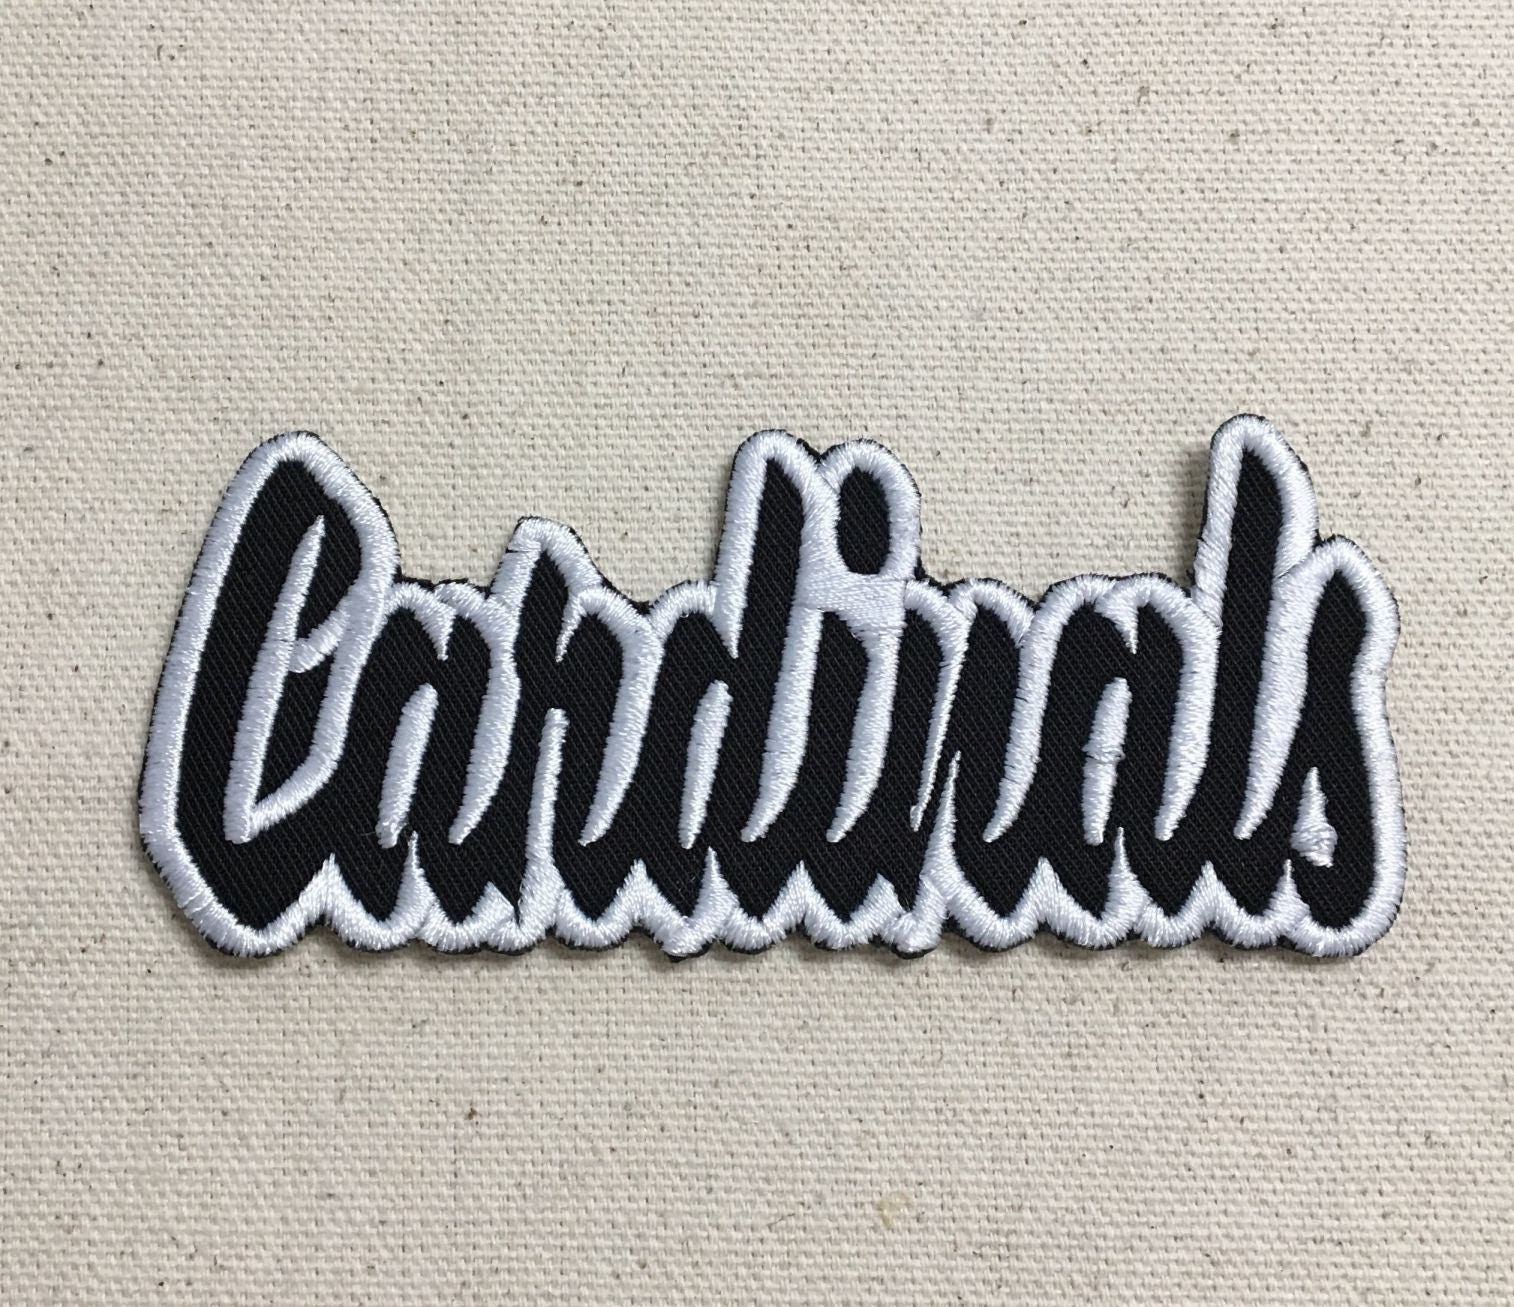 Cardinals - Red/Black - Team Mascot - Words/Names - Iron on  Applique/Embroidered Patch 